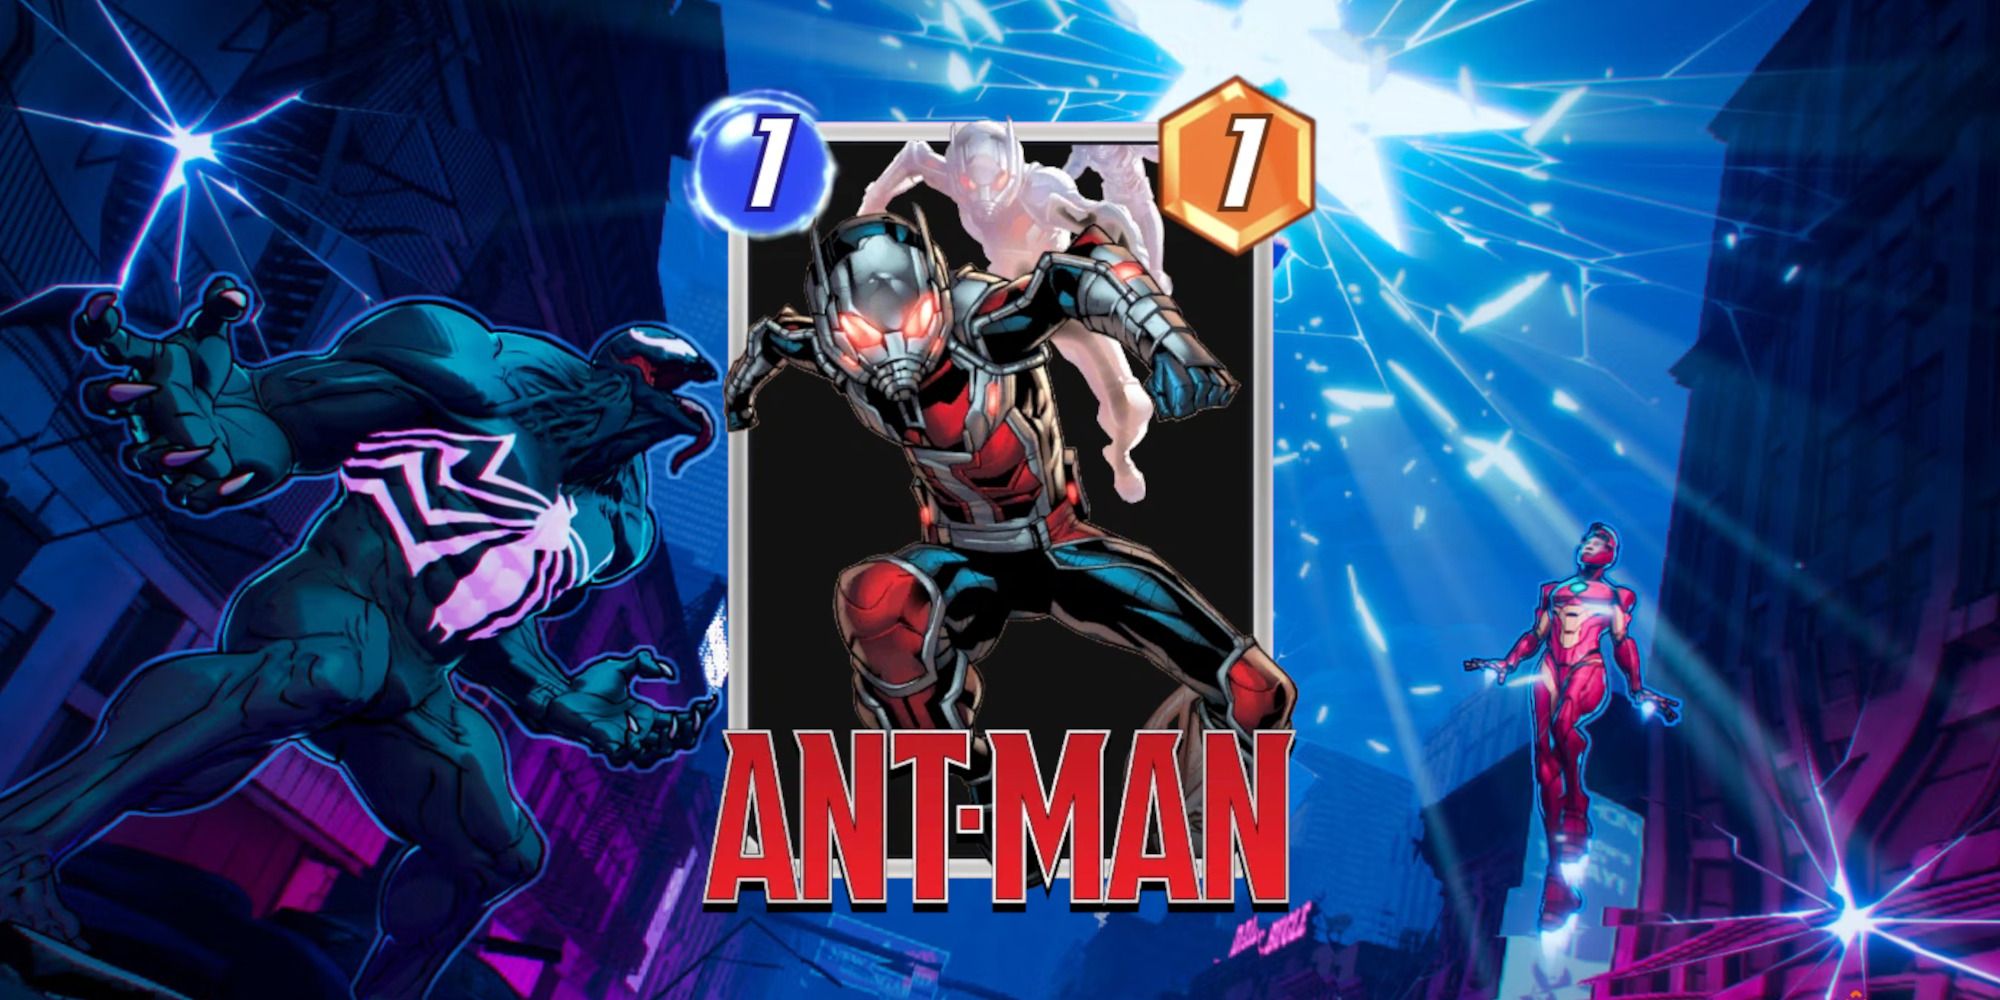 The Ant-Man card from Marvel Snap on top of promotional art.